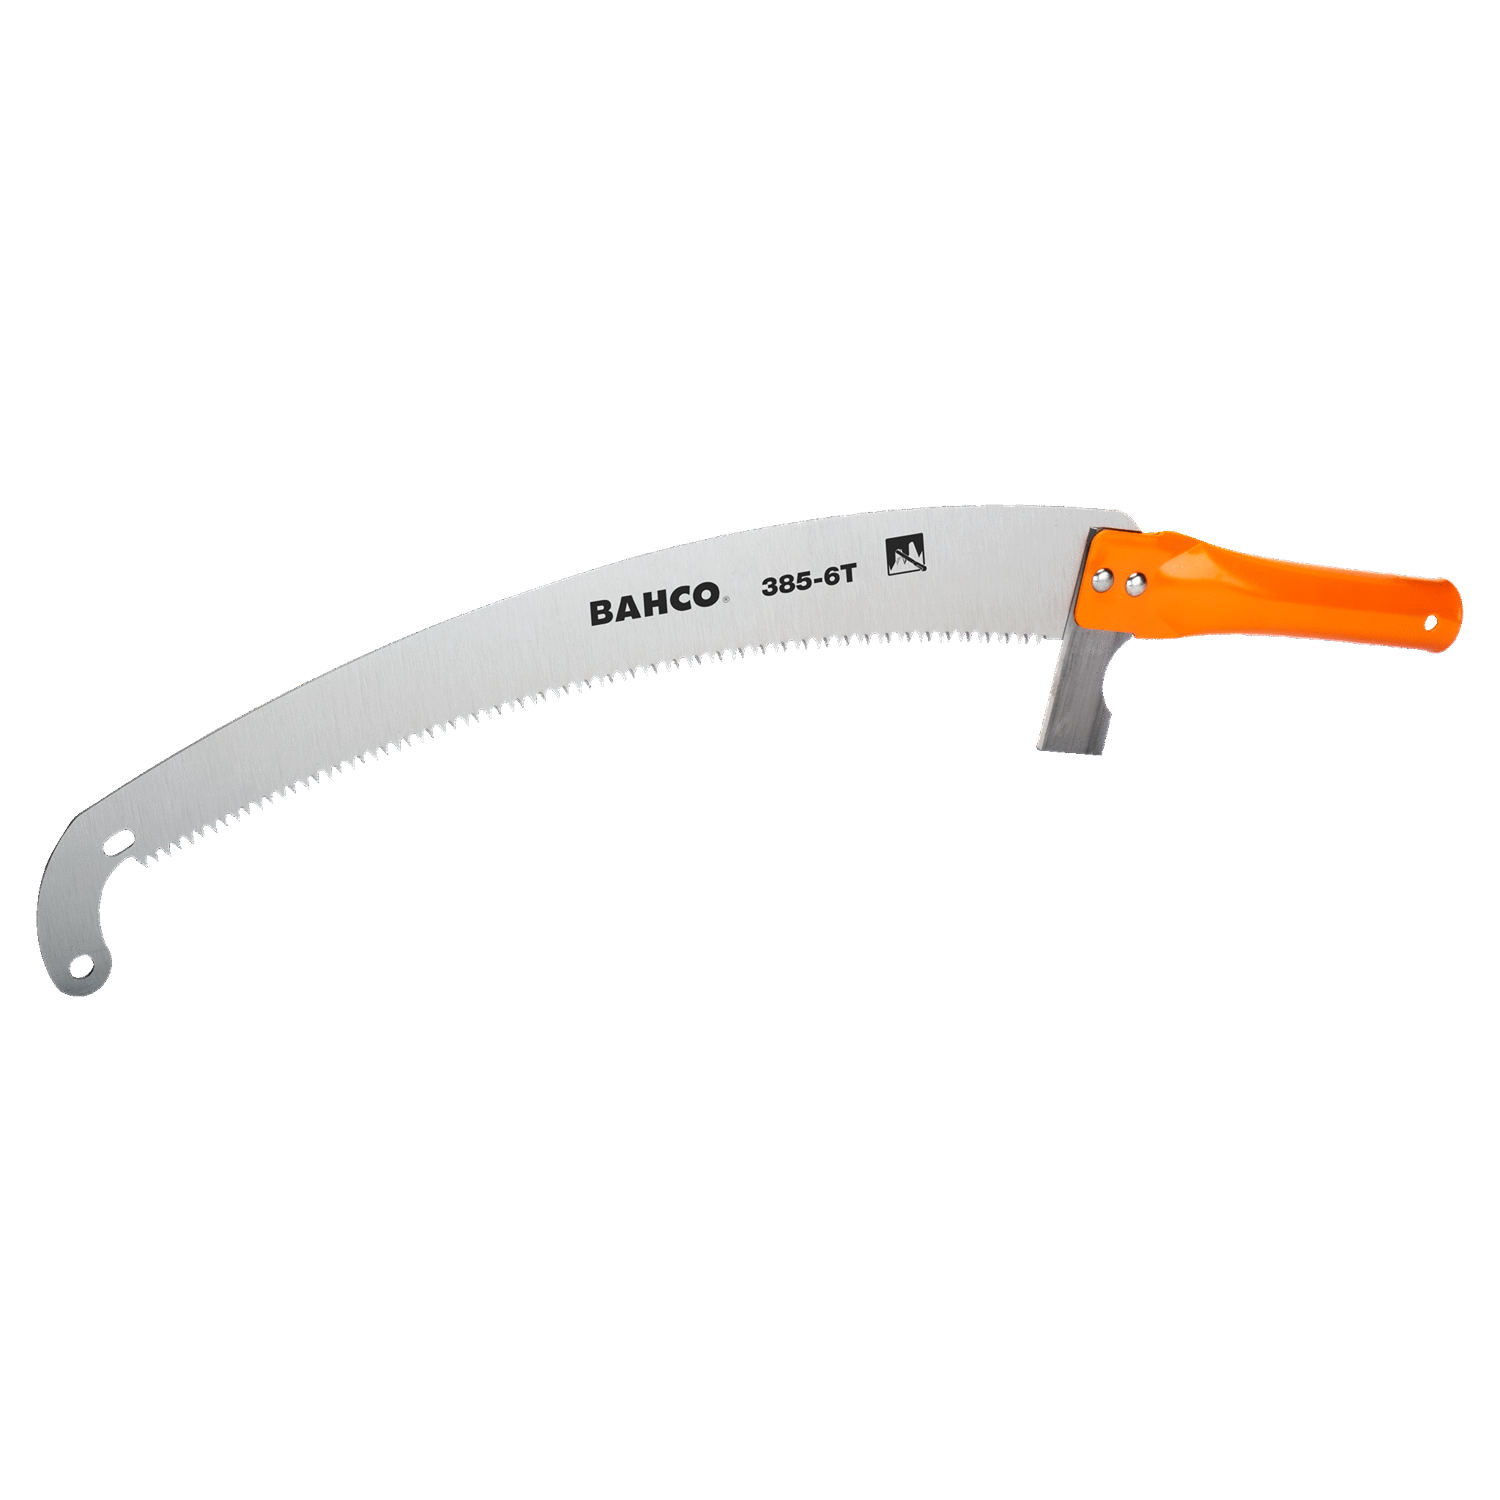 BAHCO 385-/386- Fileable Teeth Pole Pruning Saw Steel Tube Handle - Premium Pole Pruning Saw from BAHCO - Shop now at Yew Aik.